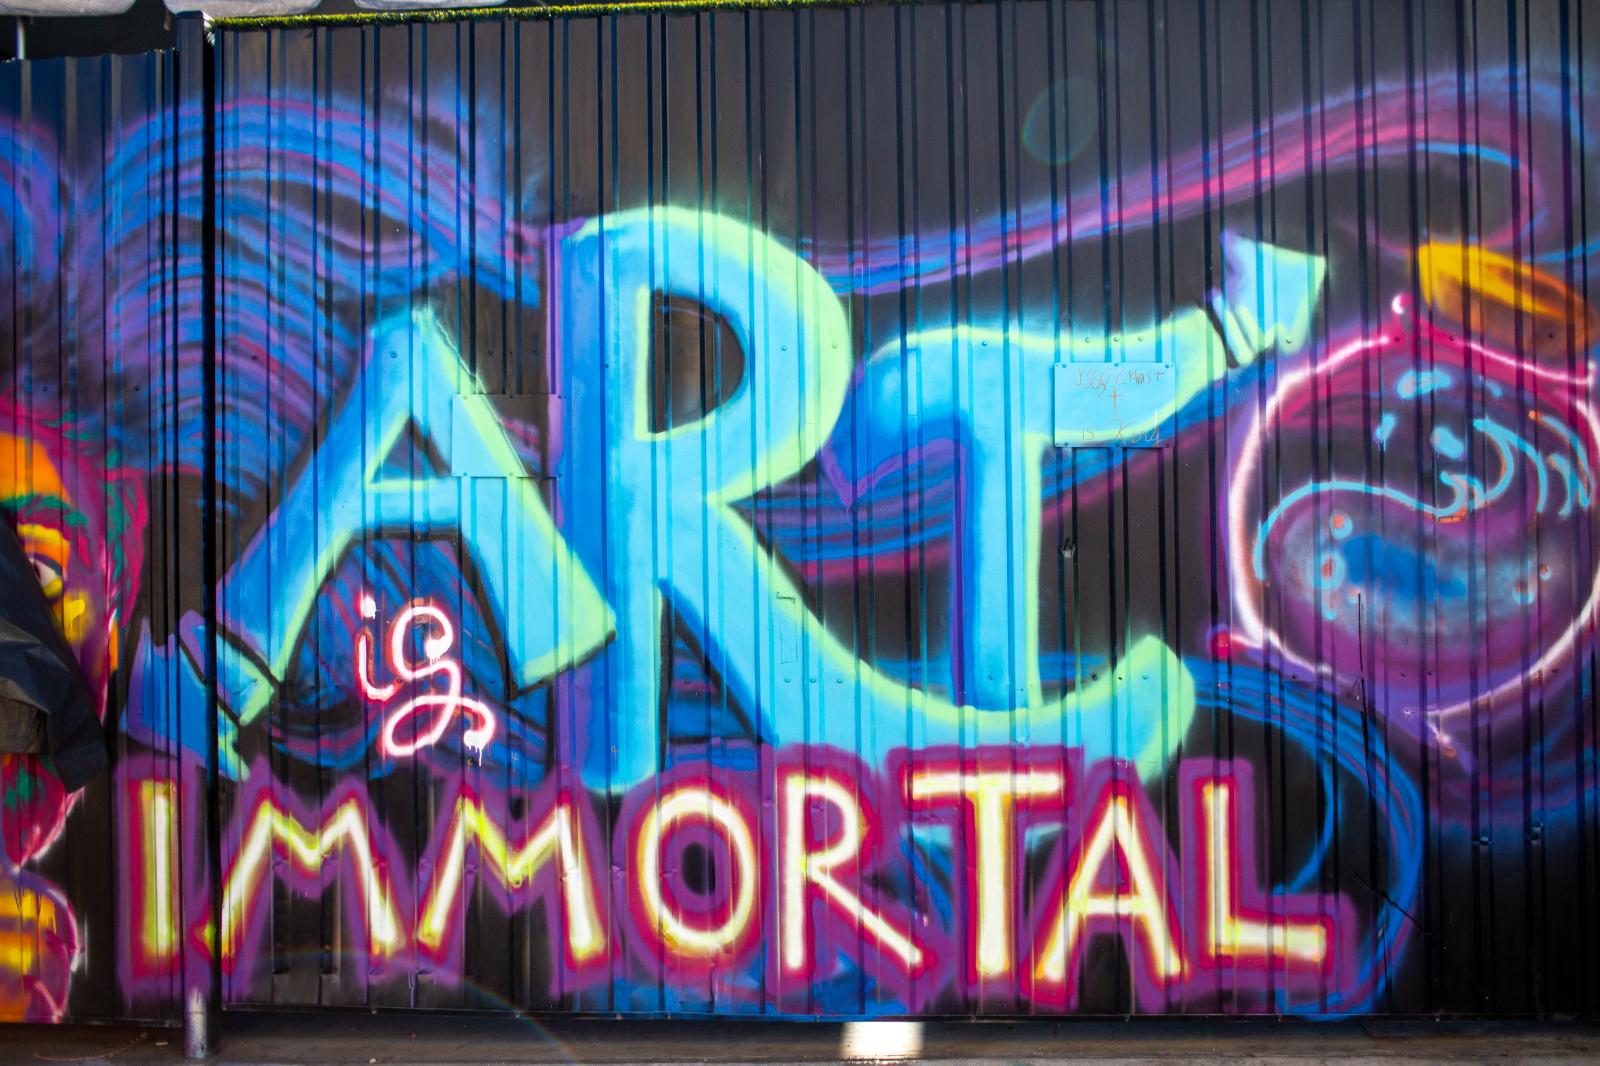 Art is Immortal | Buy this image